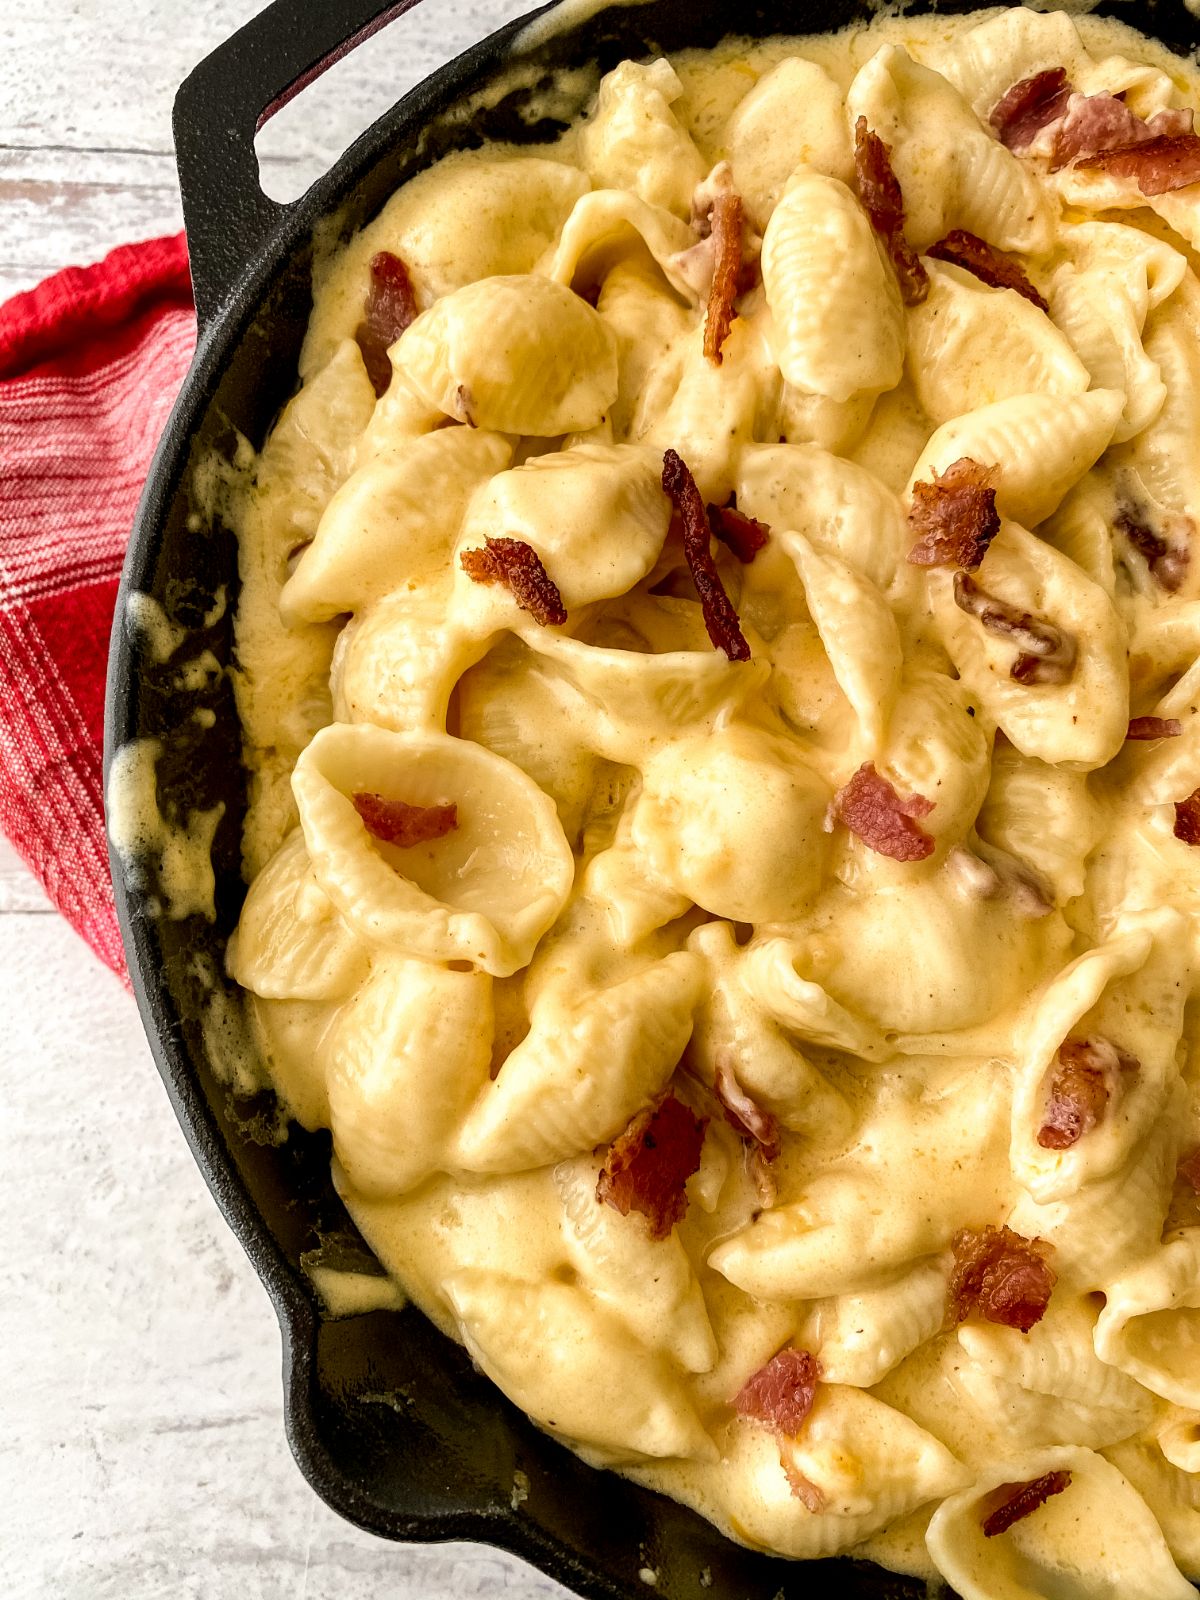 cast iron skillet filled with macaroni and cheese on table with red napkin